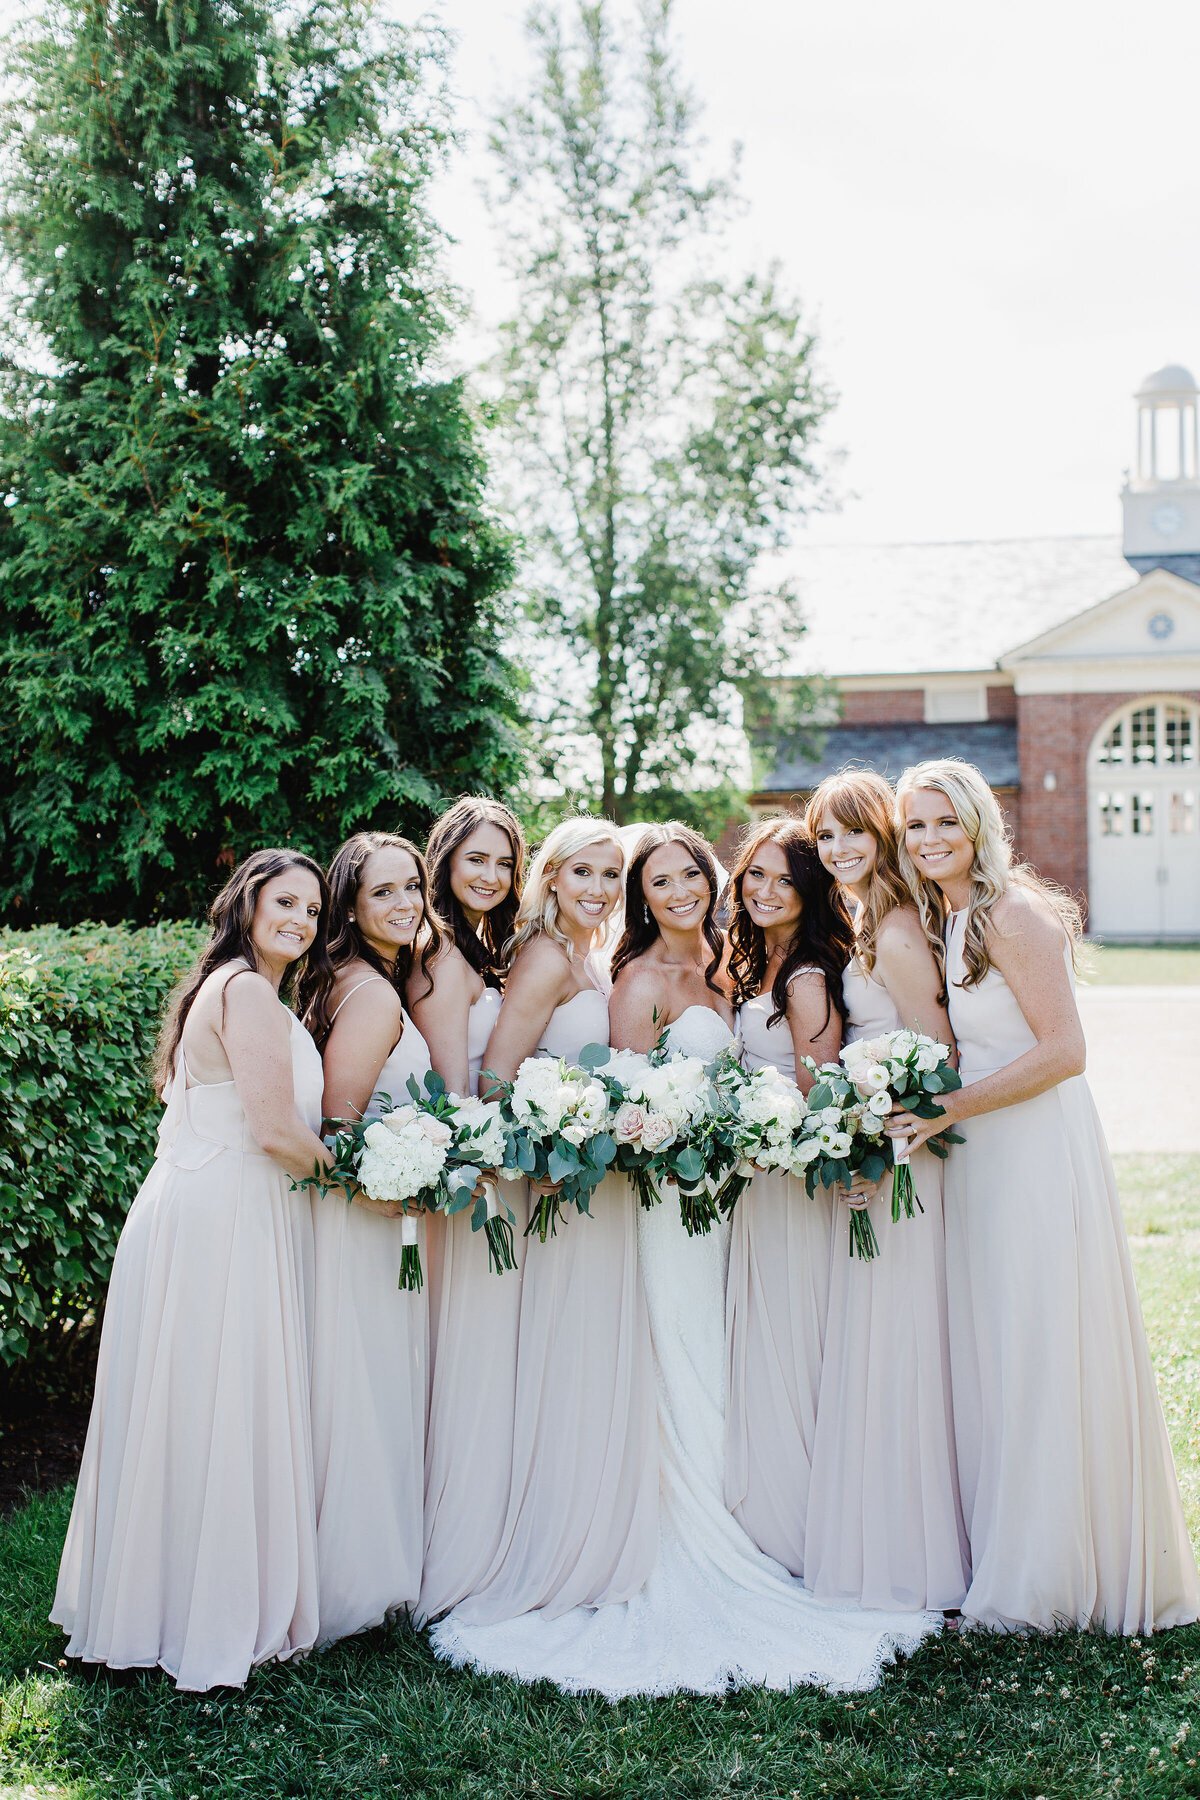 An image capturing a warm moment of bridesmaids hugging each other, likely representing friendship and support on the wedding day